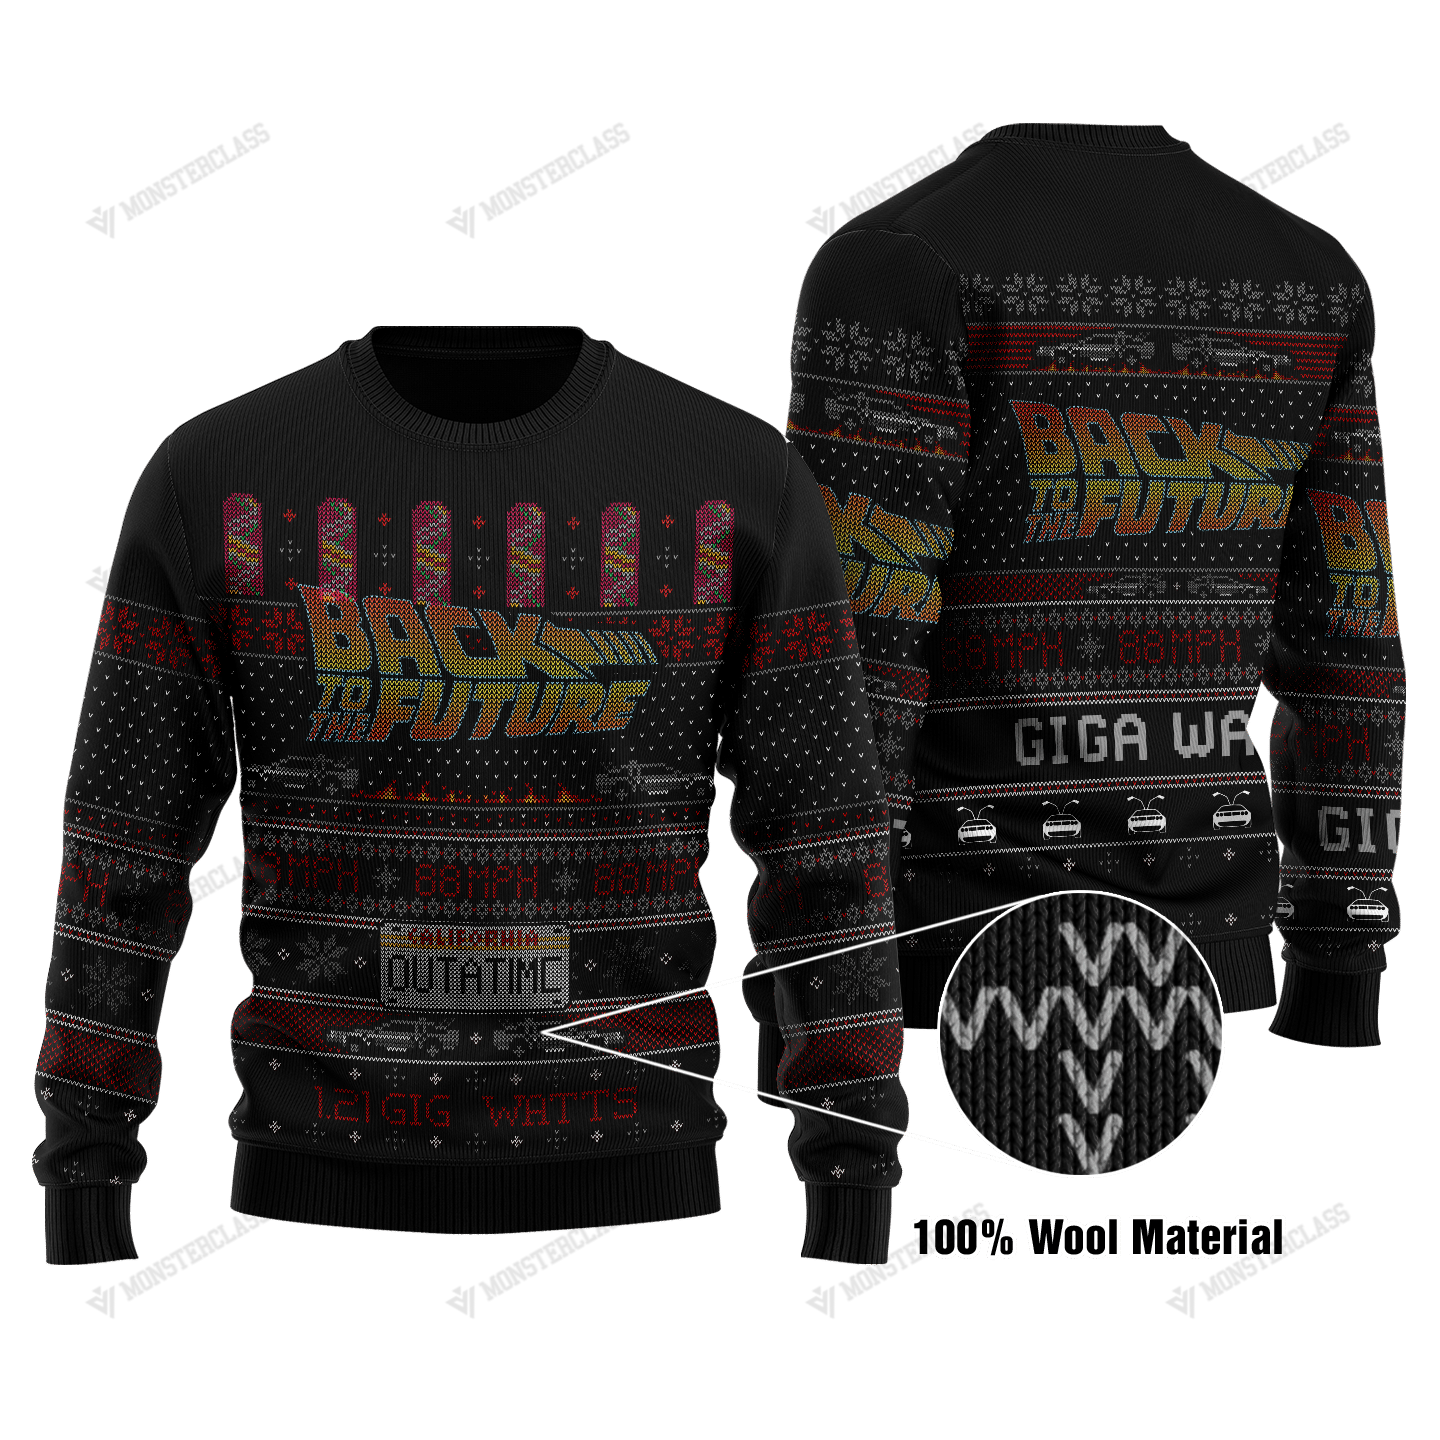 Back to the Future 121 gigawatts christmas sweater